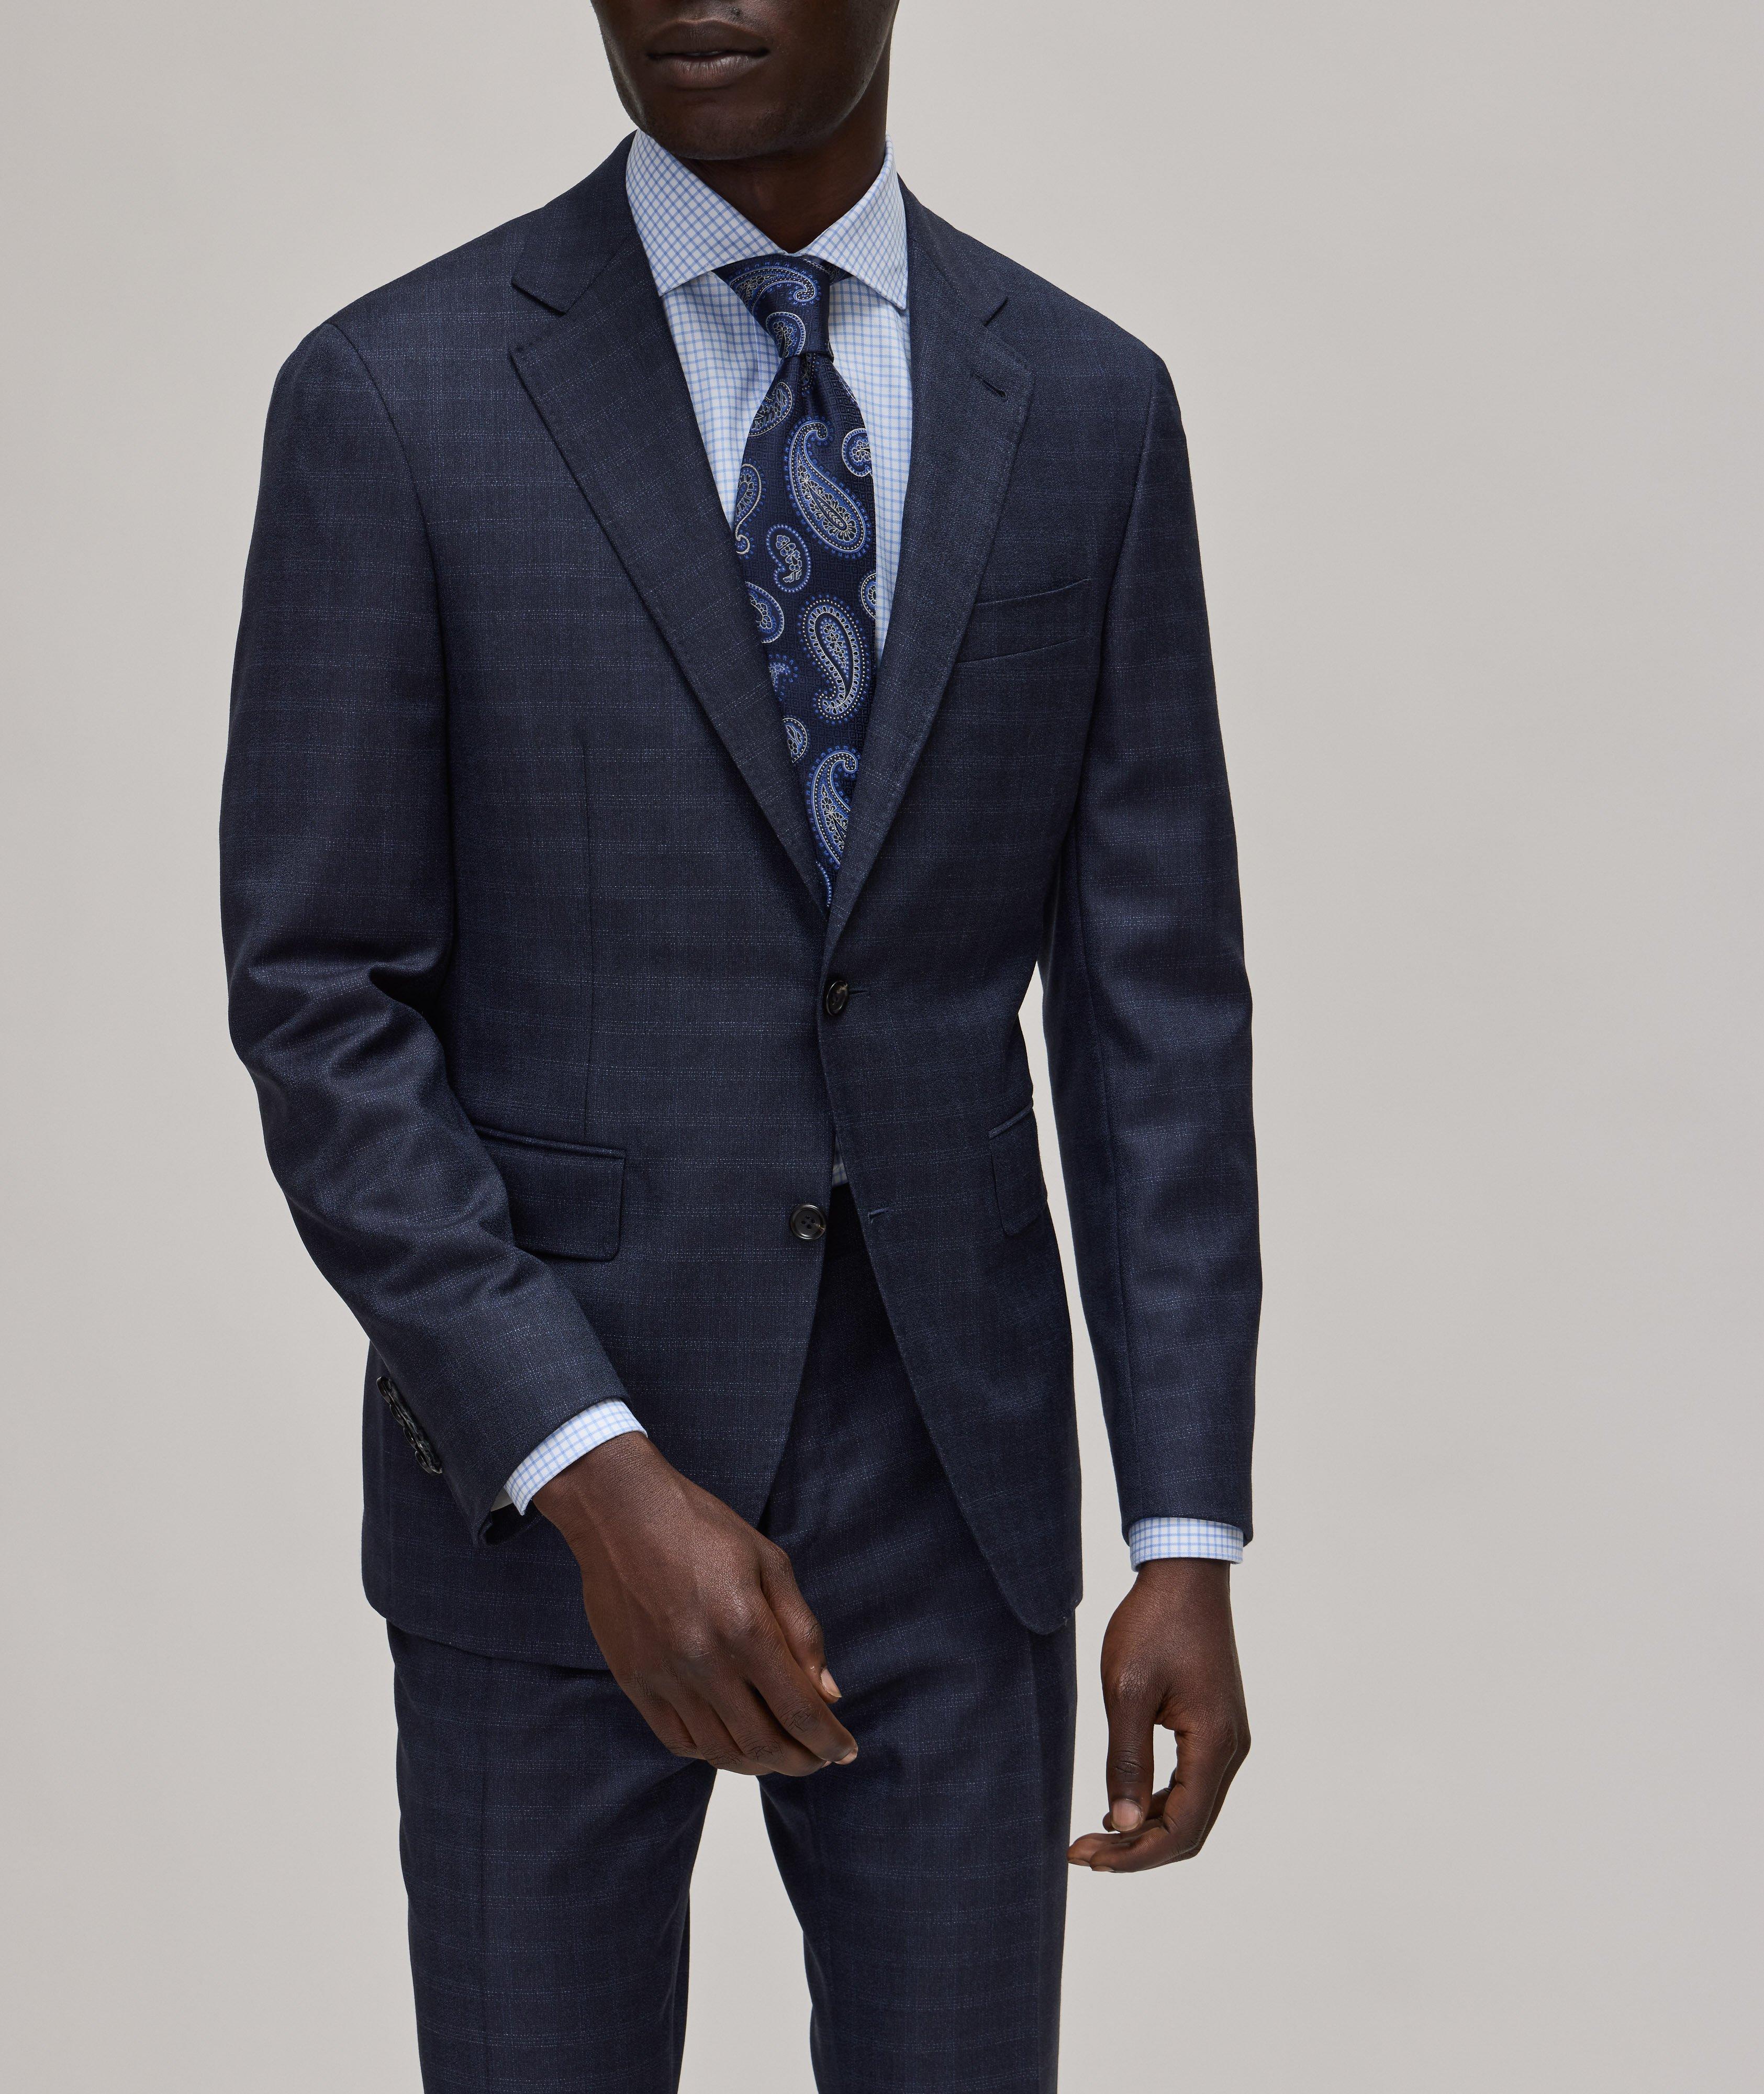 Kei Graphic Check Pattern Wool Suit image 1